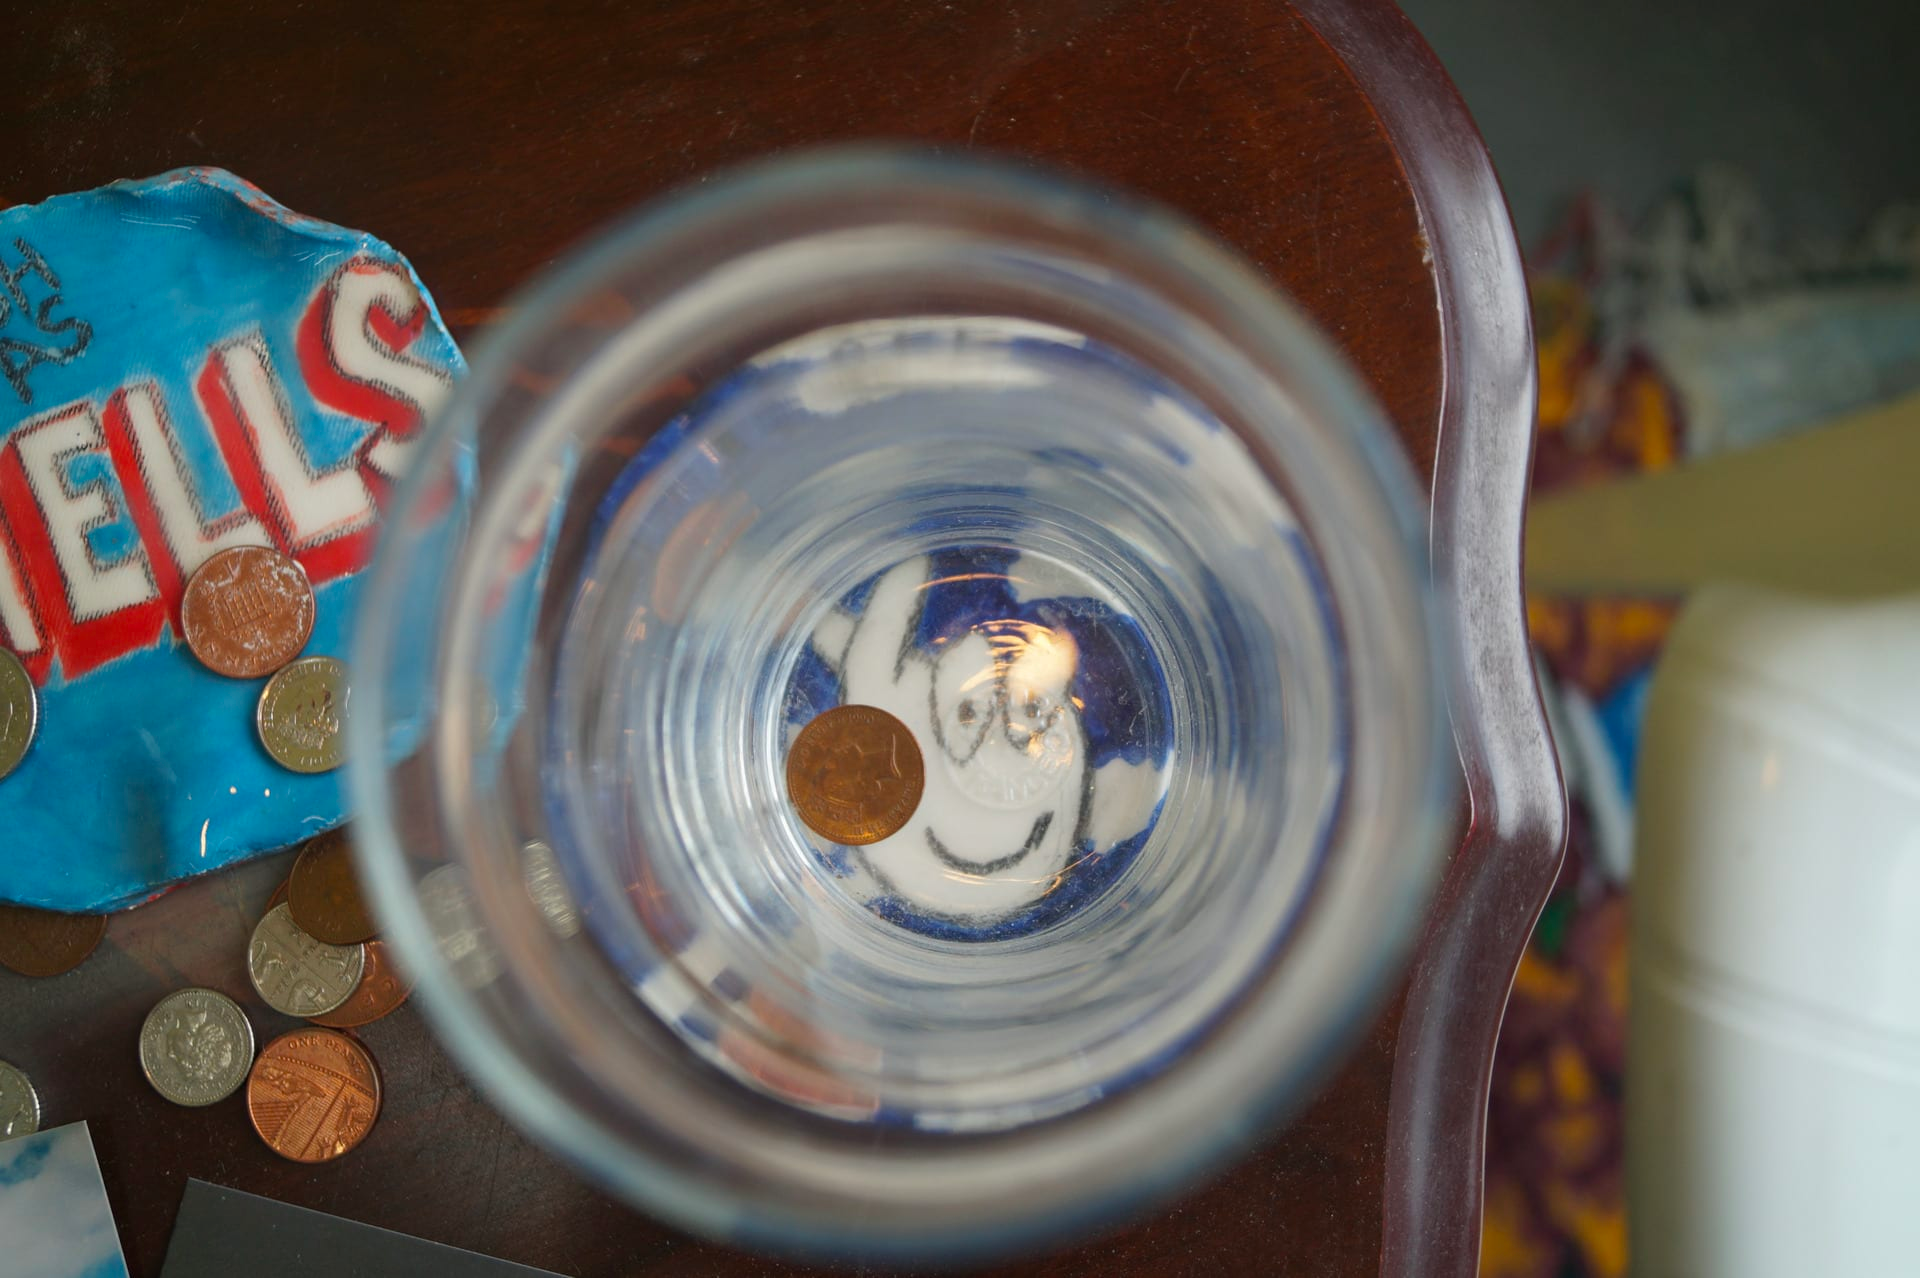 Photograph taken from above, looking into a pint glass, empty except for a small bronze coin, with other coins and objects next to or seen through the glass, which is on the edge of a wooden table.